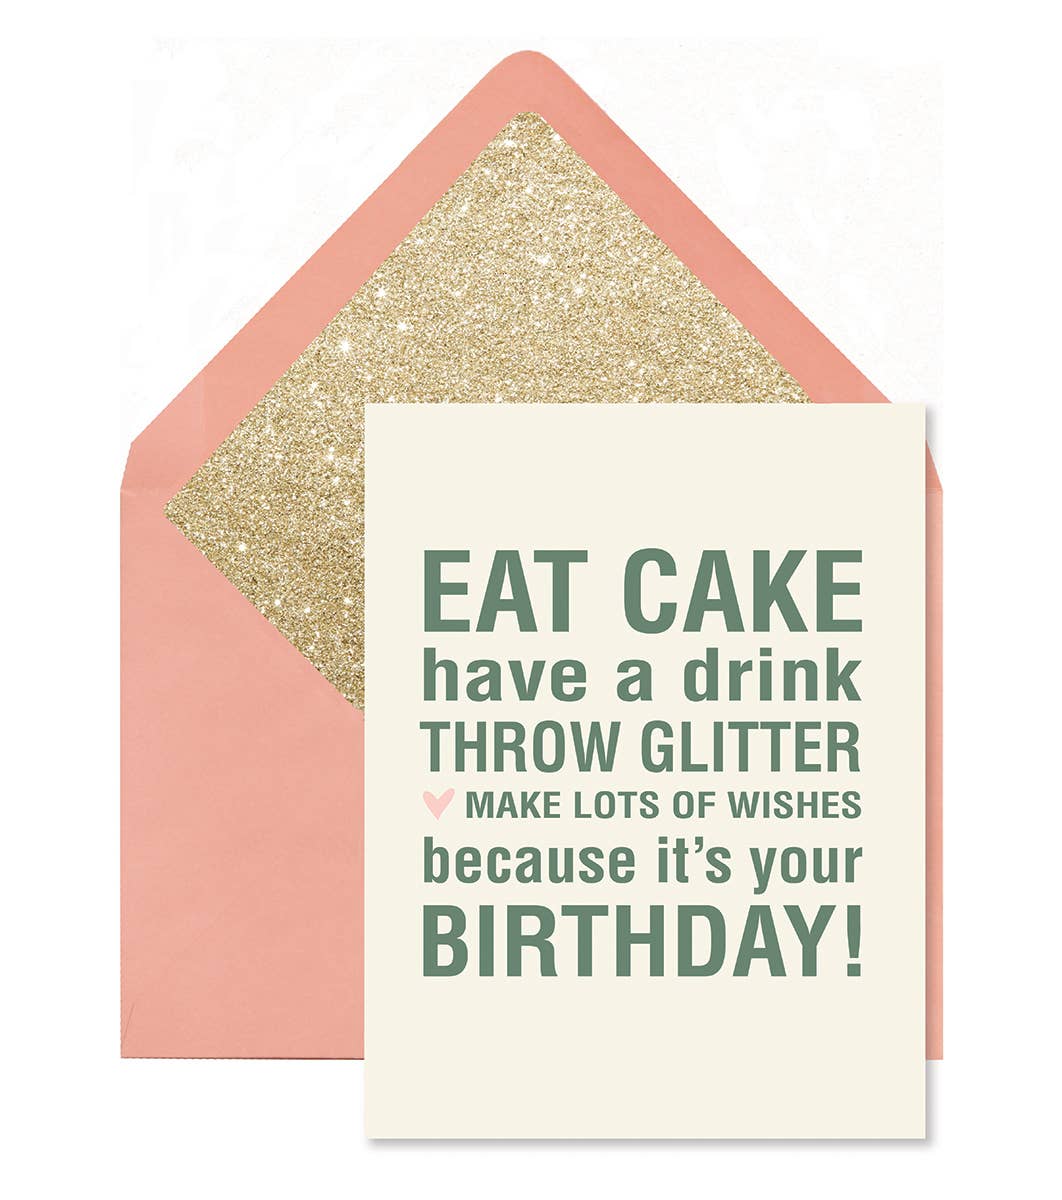 Eat Cake  have a drink Throw Glitter makes lots of wishes because its your birthday! Birthday Card with coordinating envelope by Ginger P. Designs. 